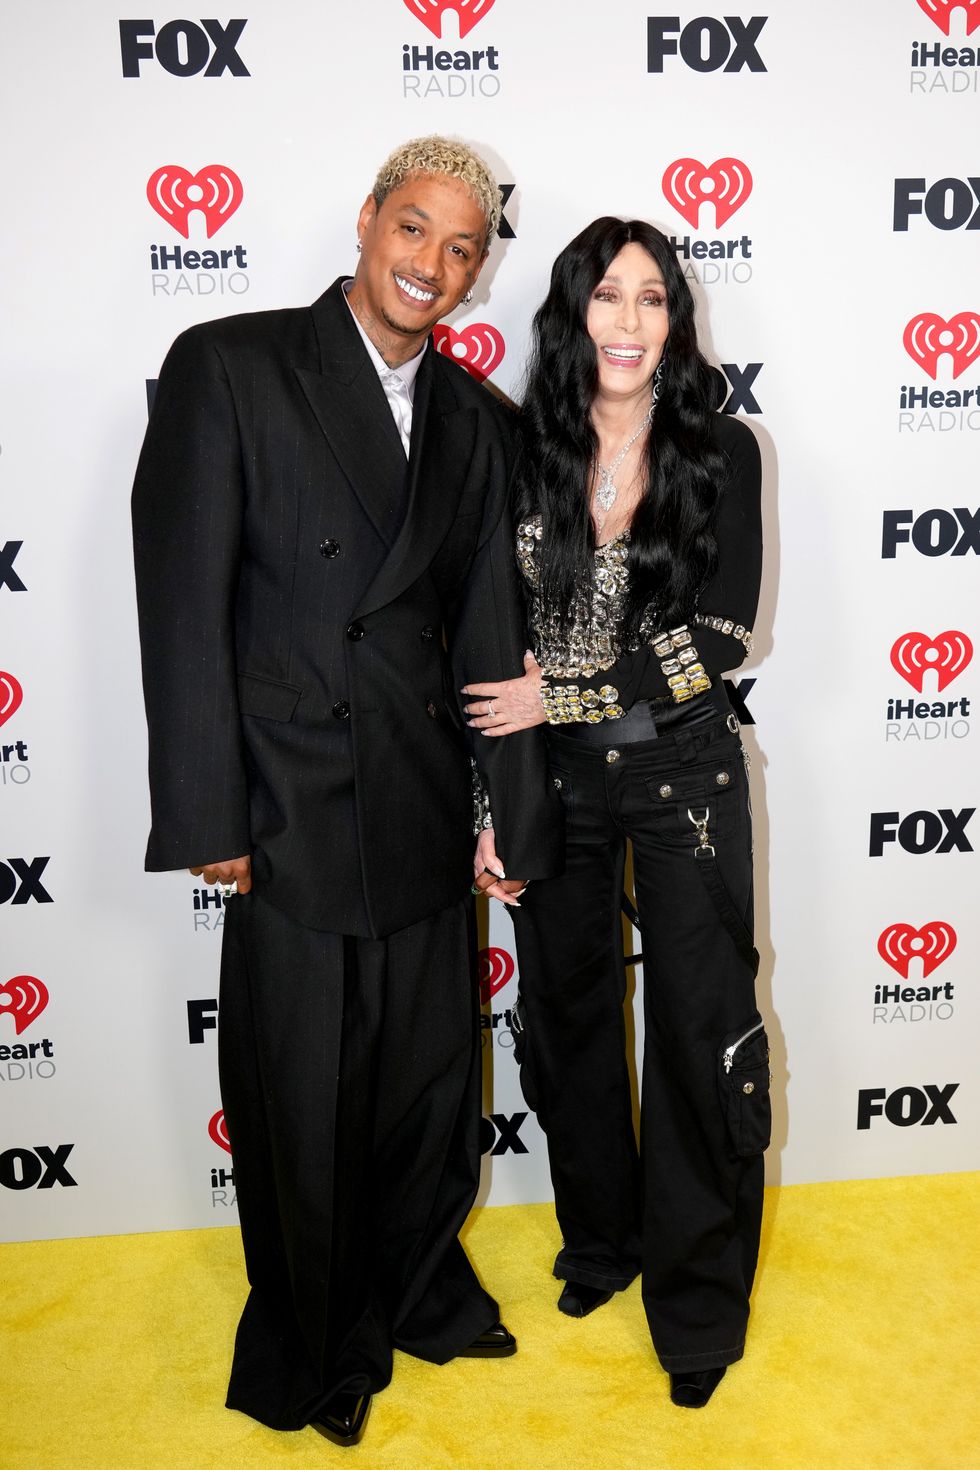 Alexander-Edwards-Cher-relationship-age-difference